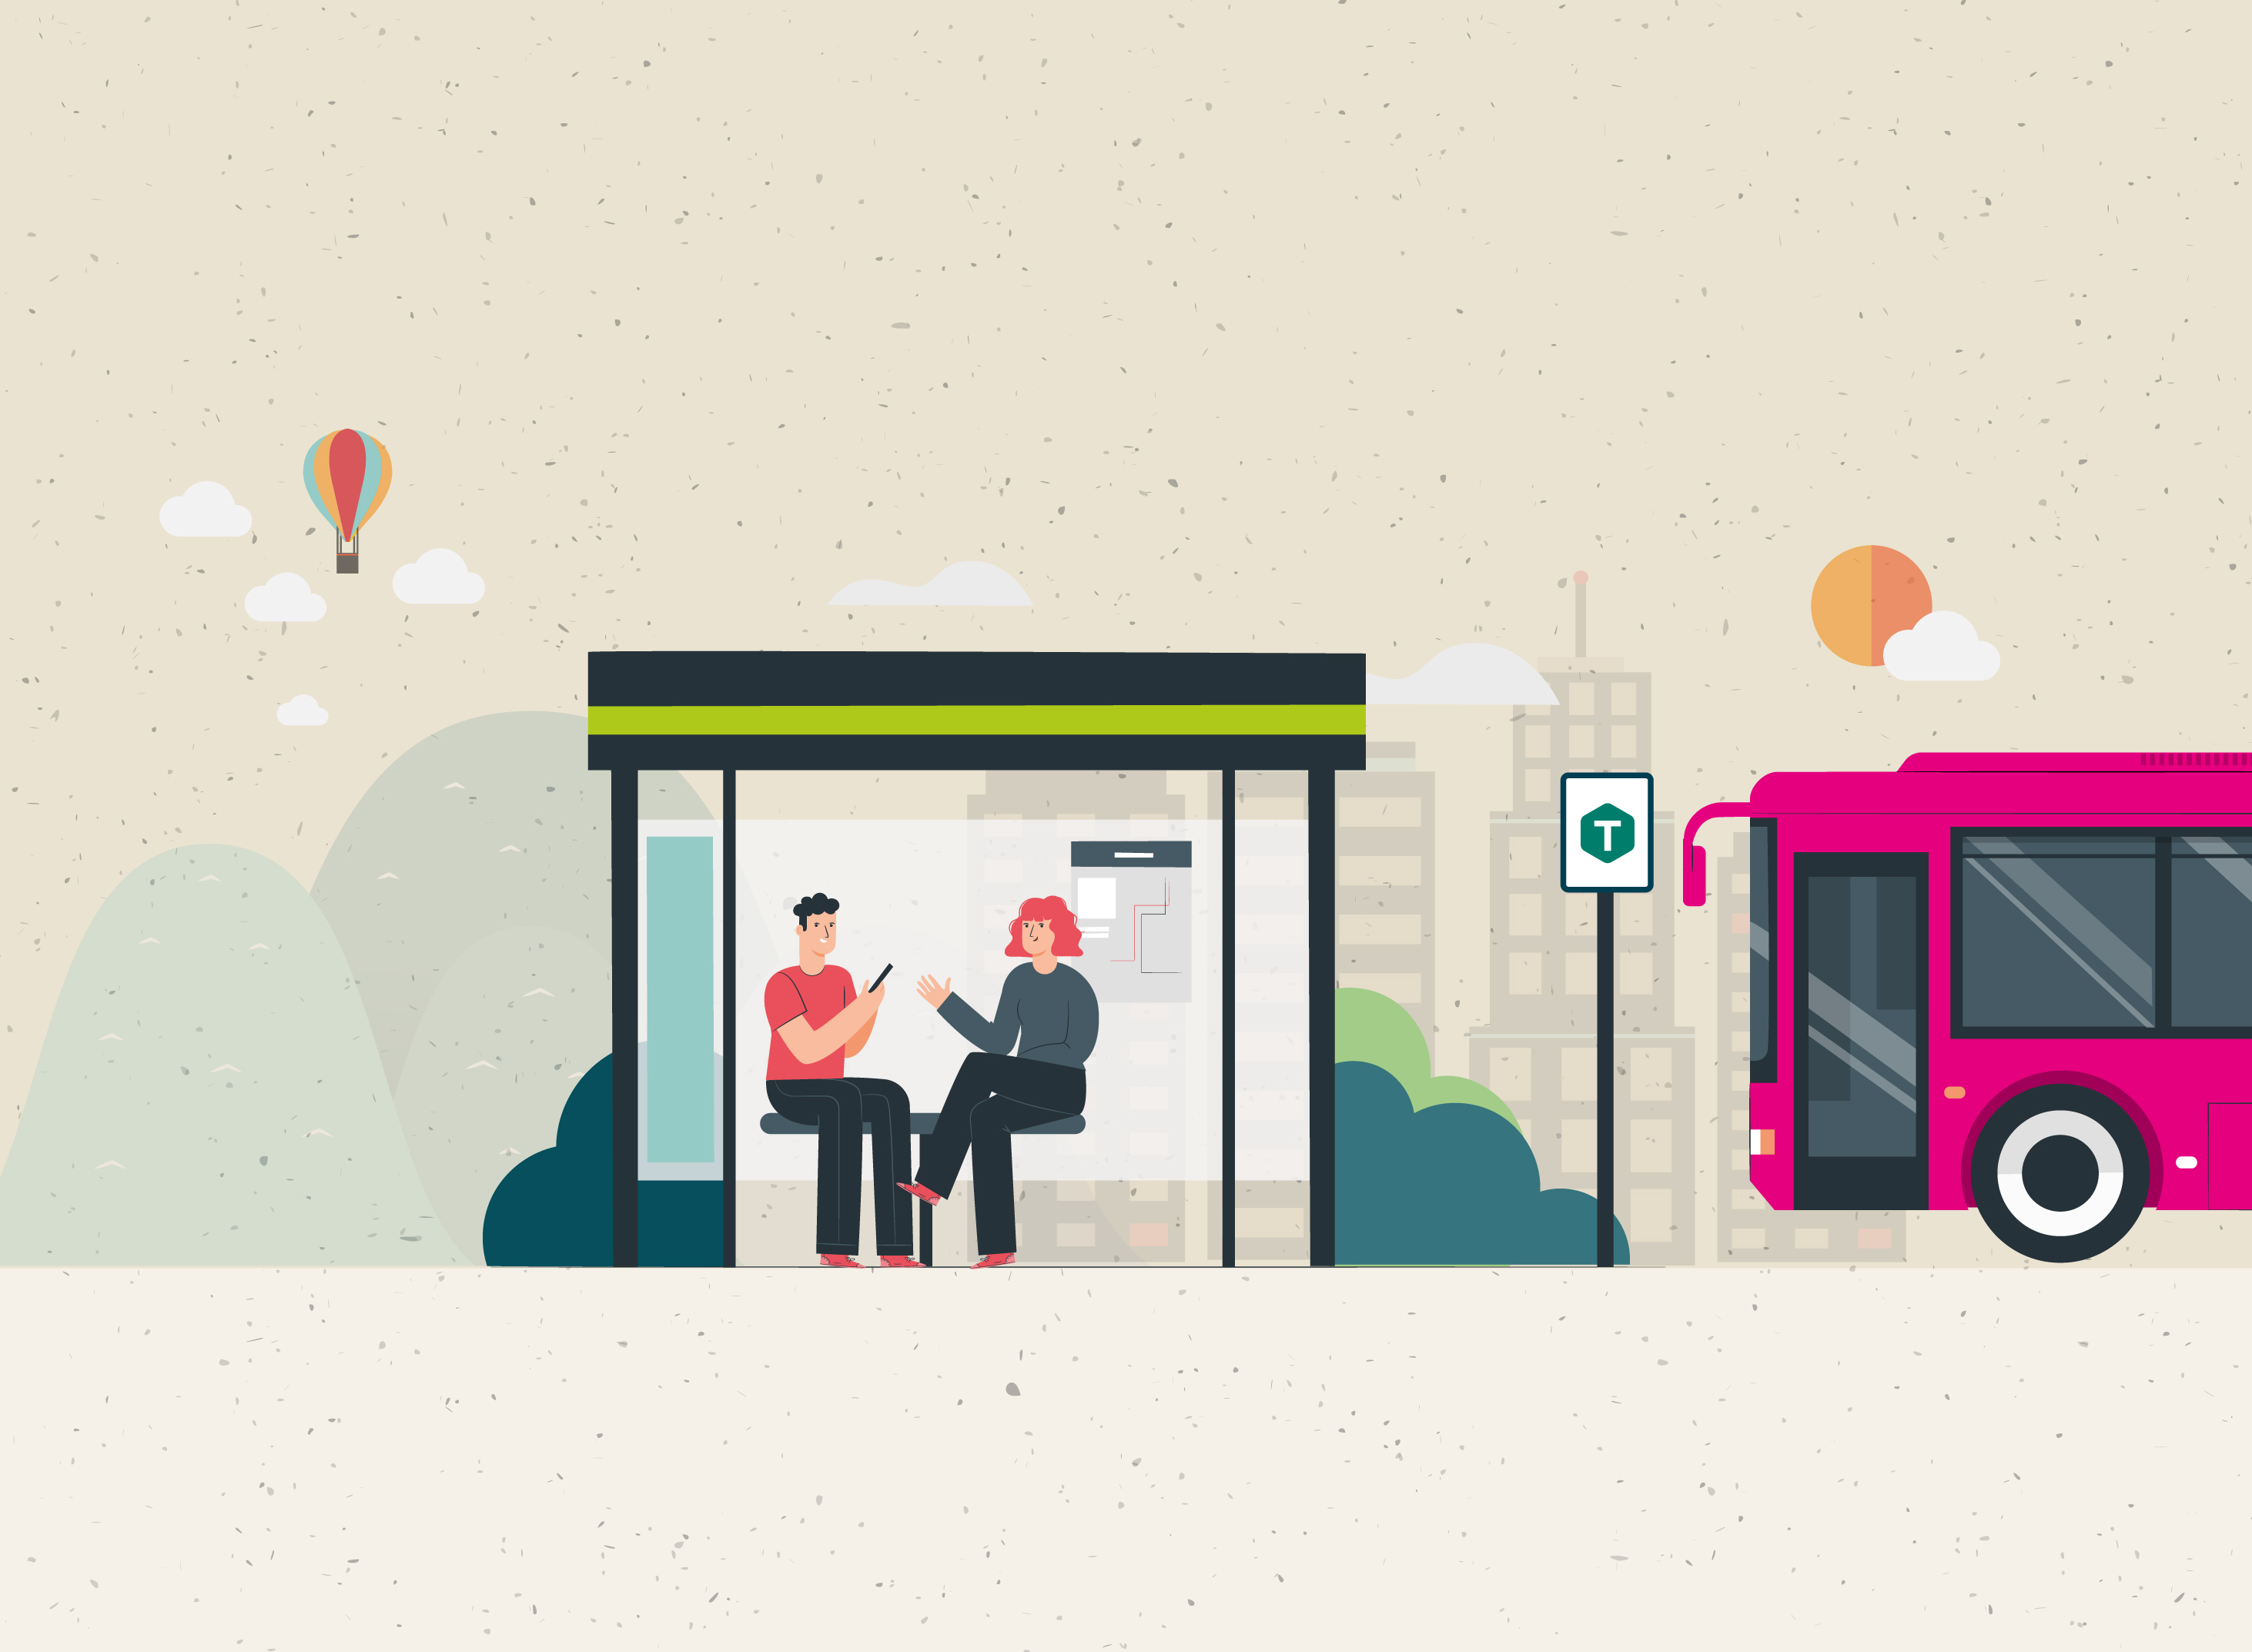 Graphic showing two people at a bus stop with a Metro bus